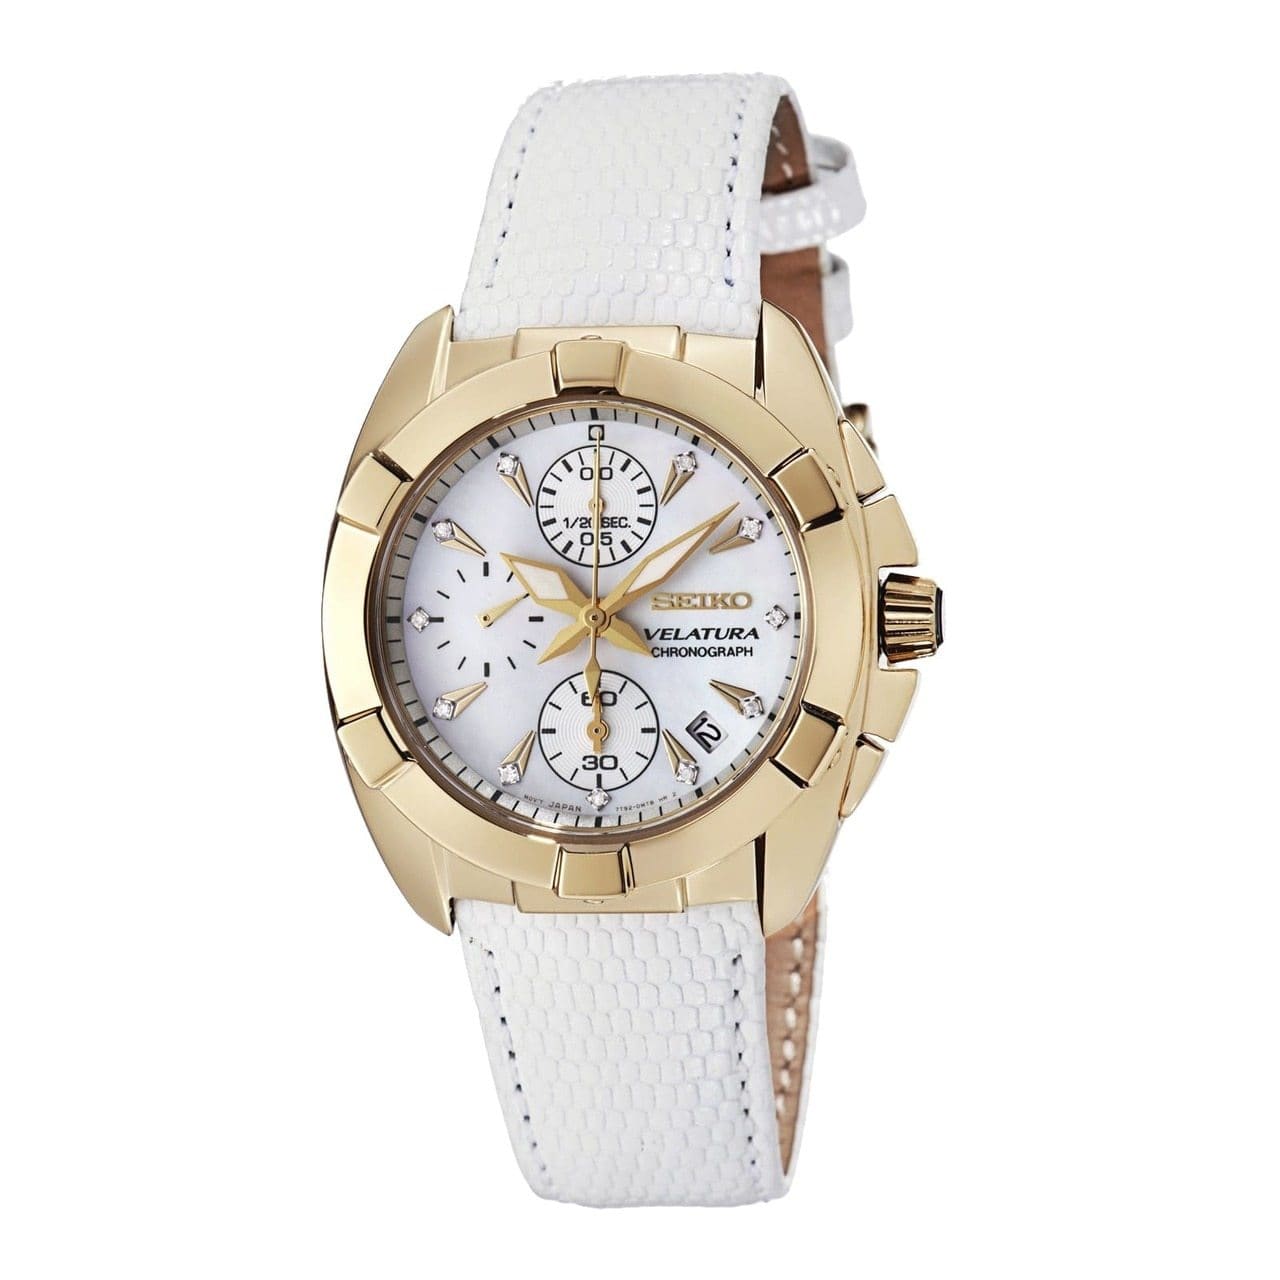 Seiko SNDY22 Velatura Mother of Pearl Dial White Leather Chronograph Watch 029665173720